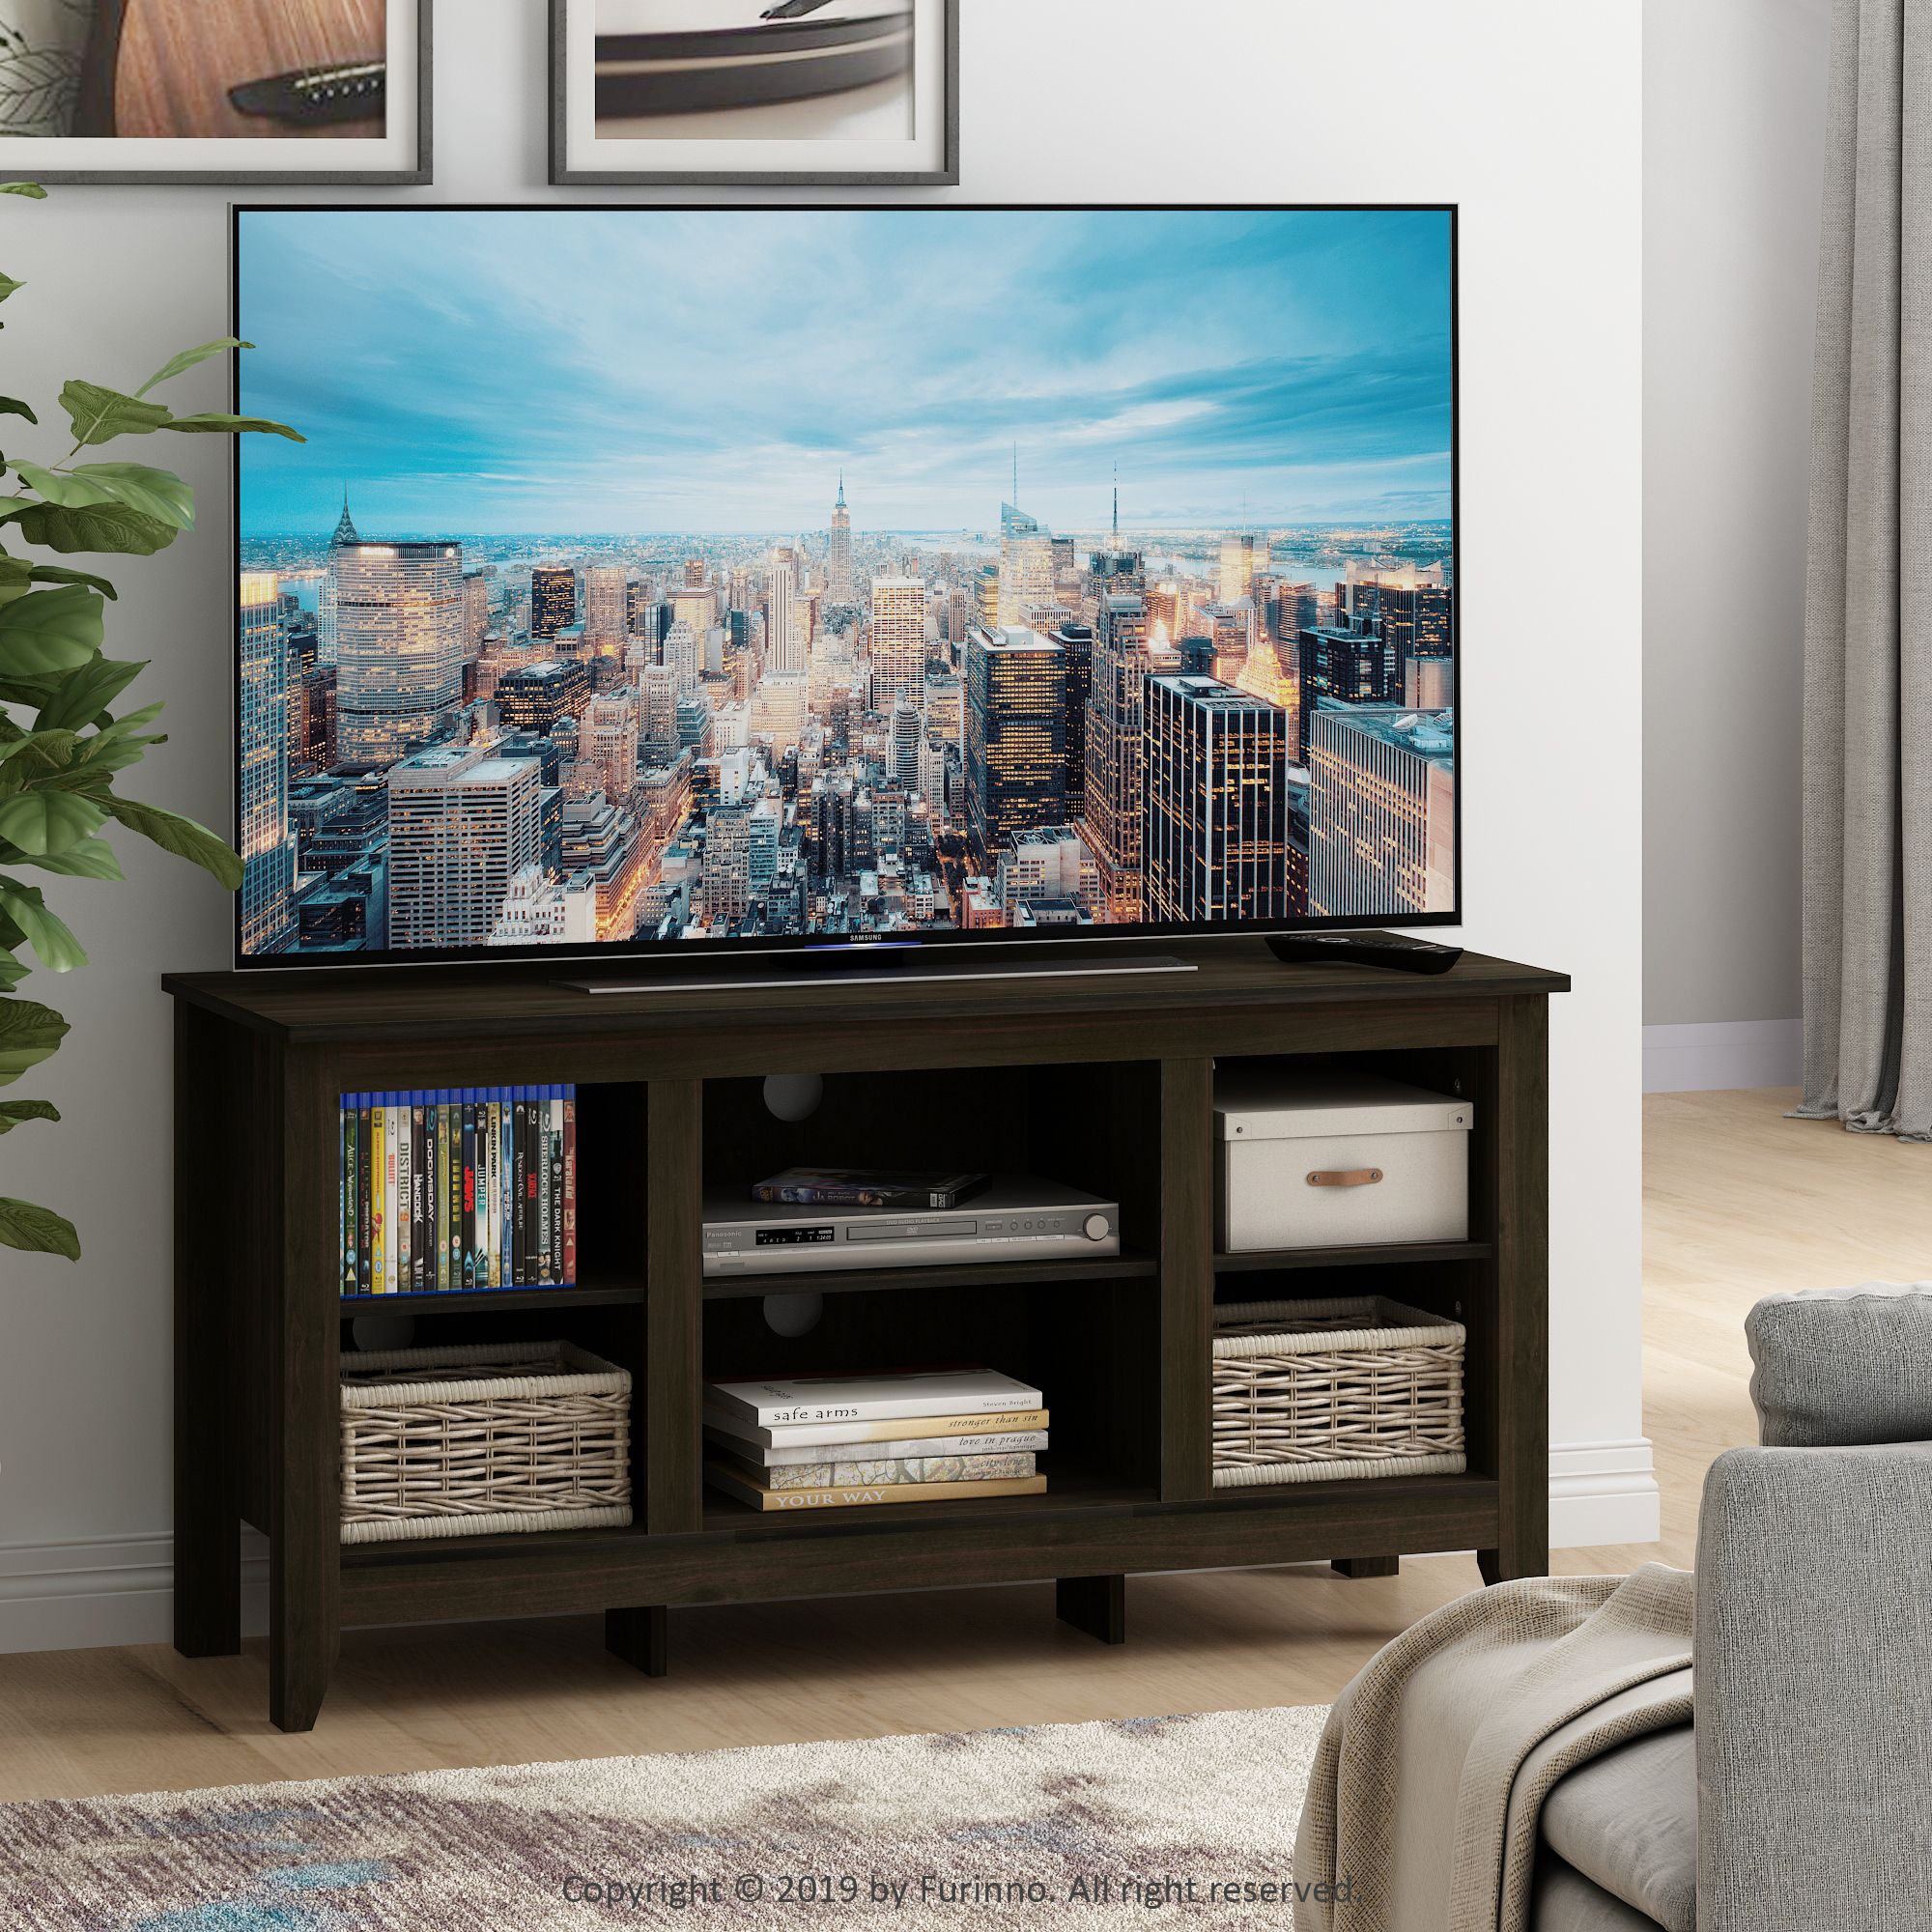 Furinno Jensen Tv Stand With Shelves, For Tv Up To 55 Inch Inside Expresso Tv Stands (View 4 of 15)